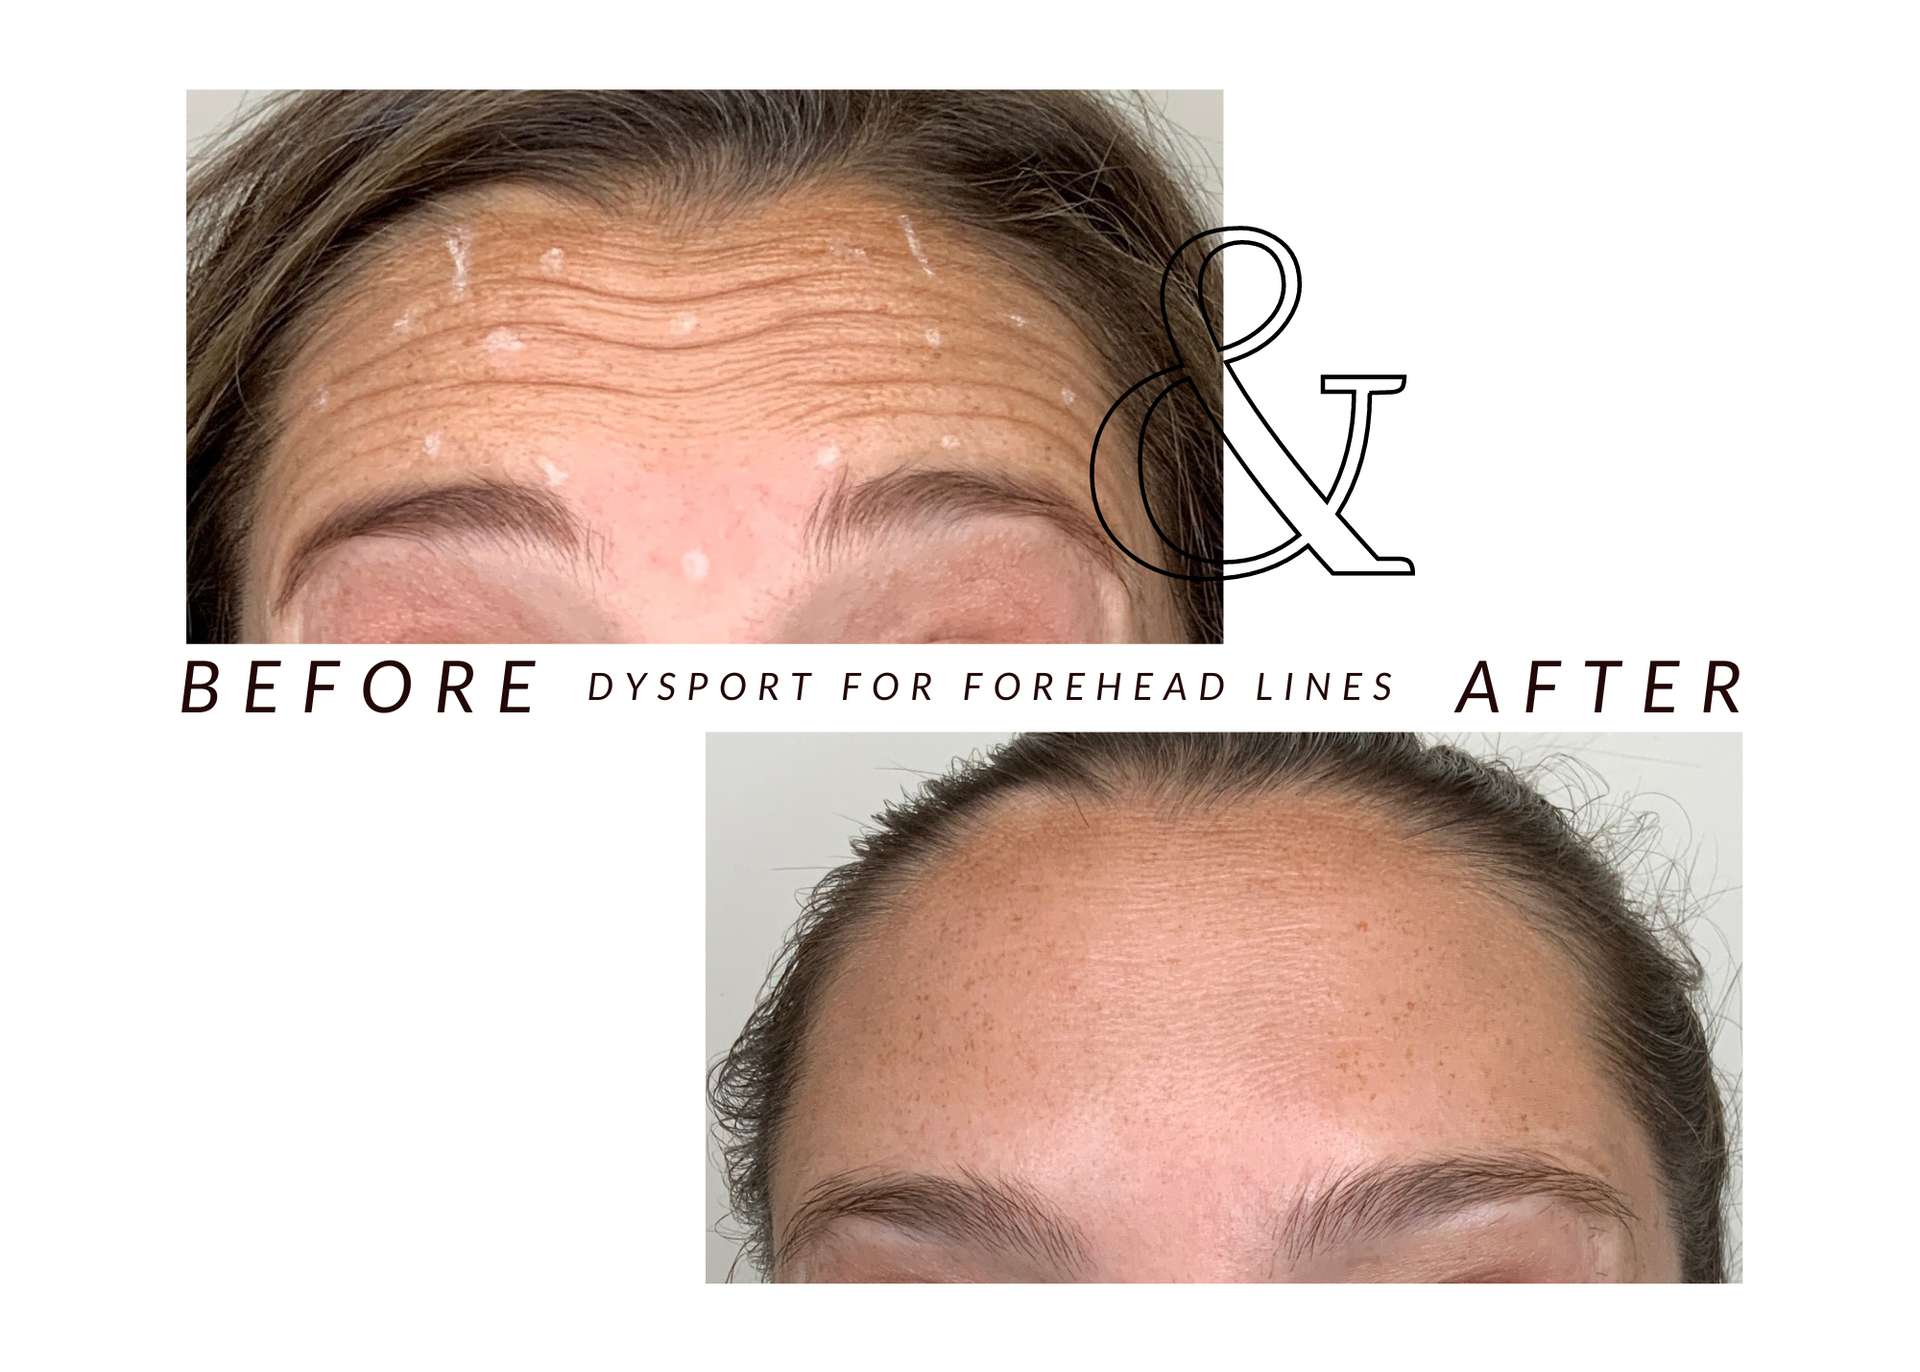 A before and after photo of a woman 's forehead lines.